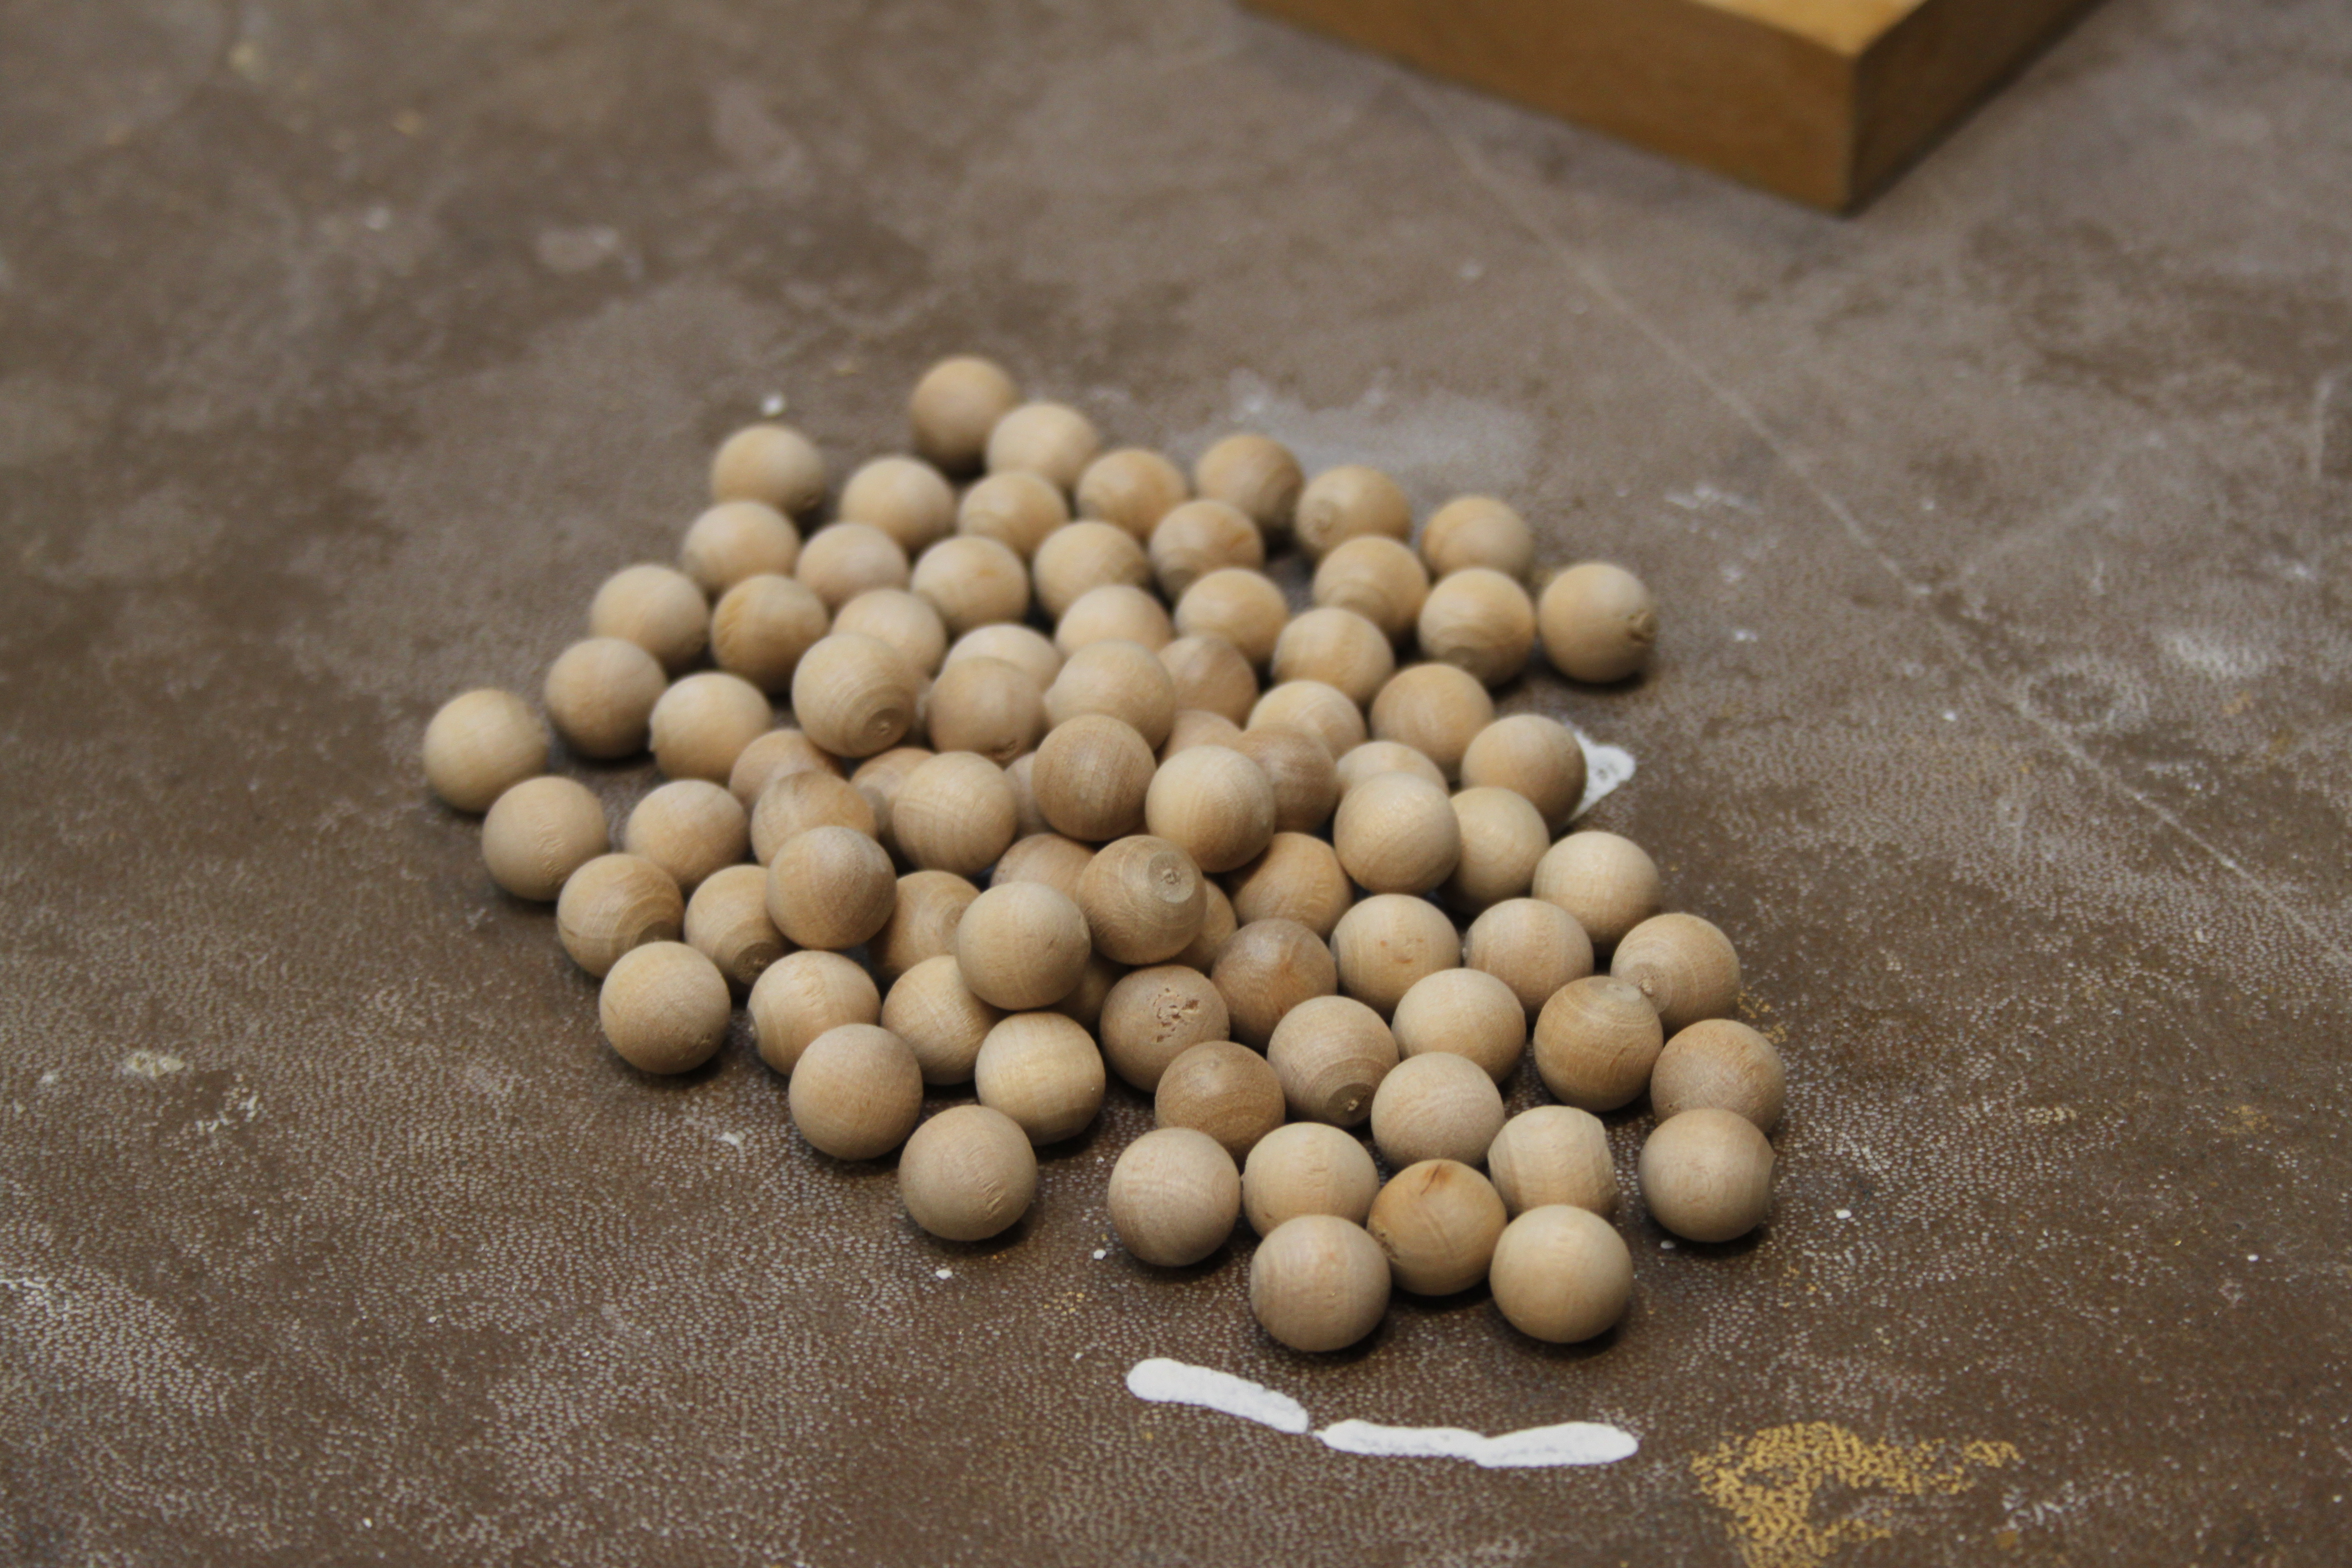 A pile of wooden balls awaiting the treatment